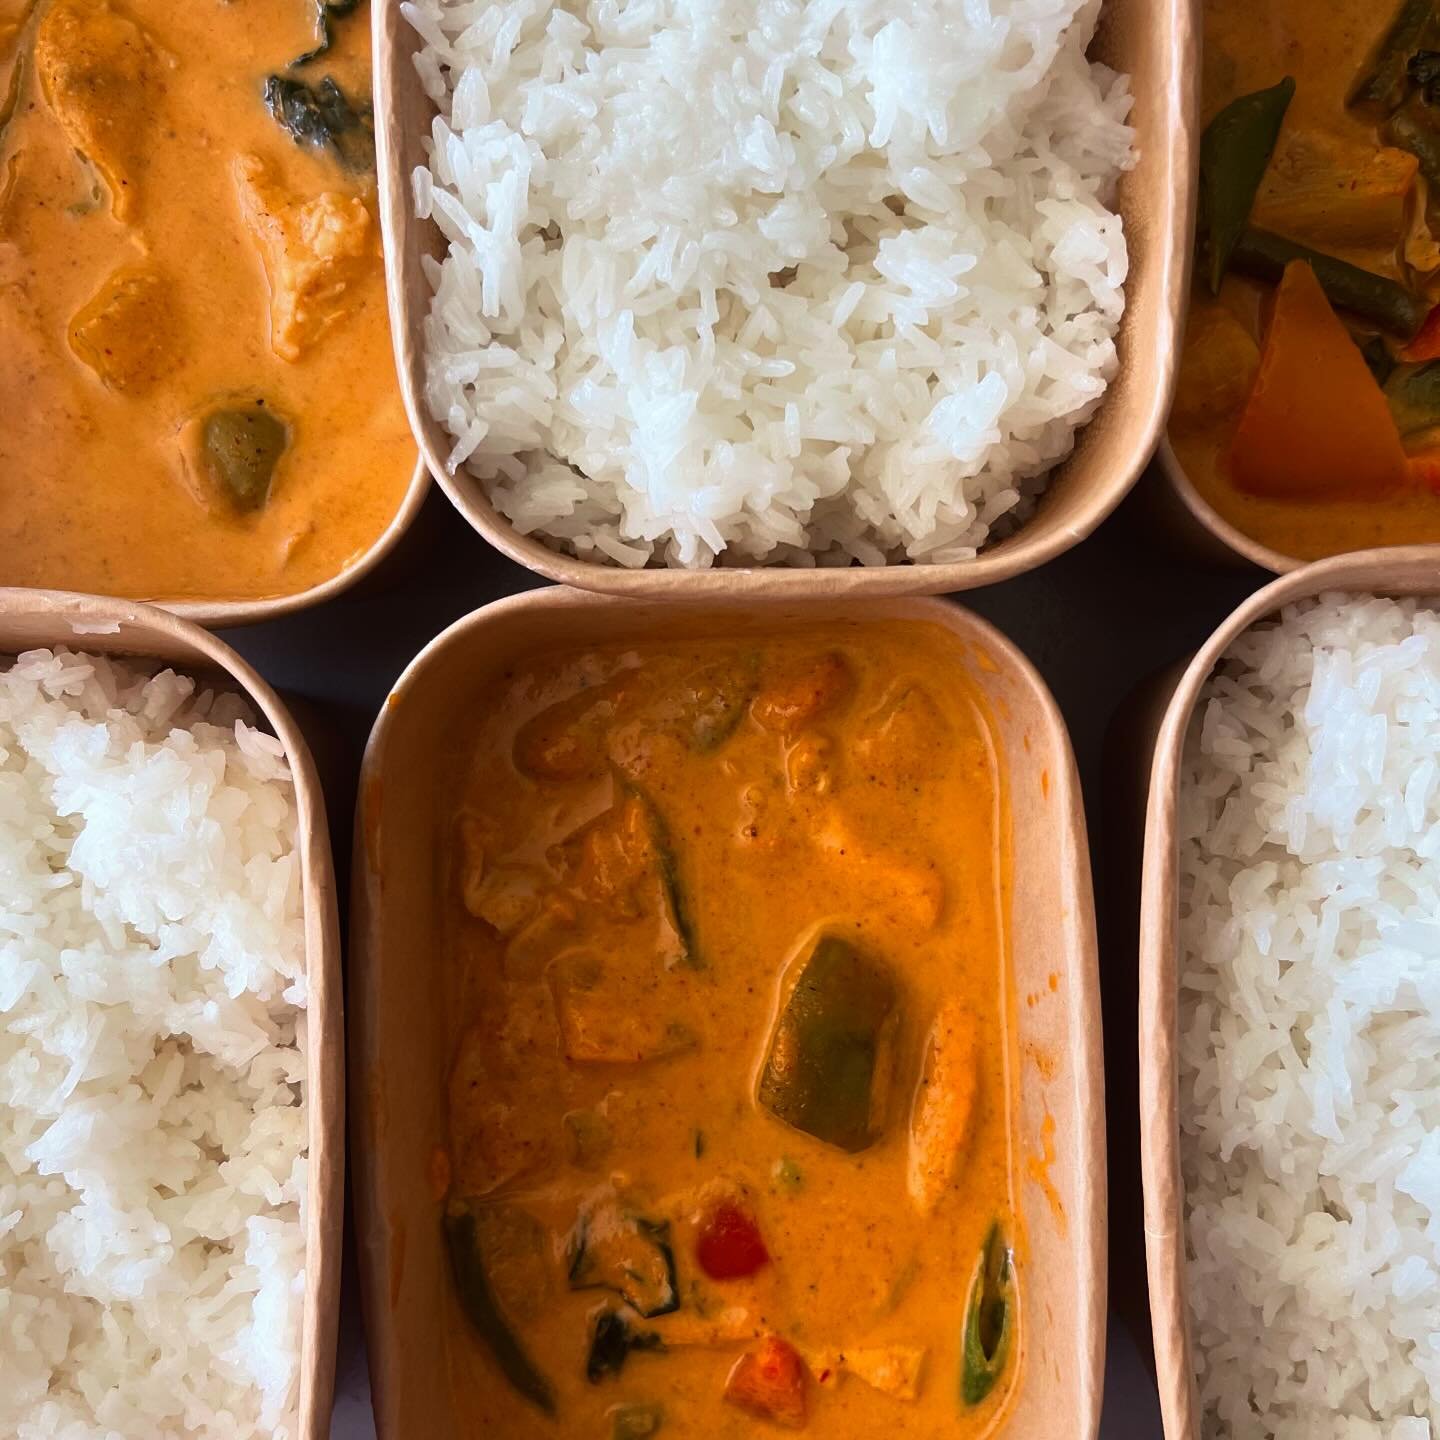 ORDER UP : Thai Chicken and Pineapple Panang Curry, Jasmine Rice 🇹🇭

#globalcuisine #foodporn #appleton #greenbay #food #neenah #veteranowned #foodlover #veterans #letmecookforyou #home #madefromscratch #homedelivery #keyroskitchen #food #thai #tha